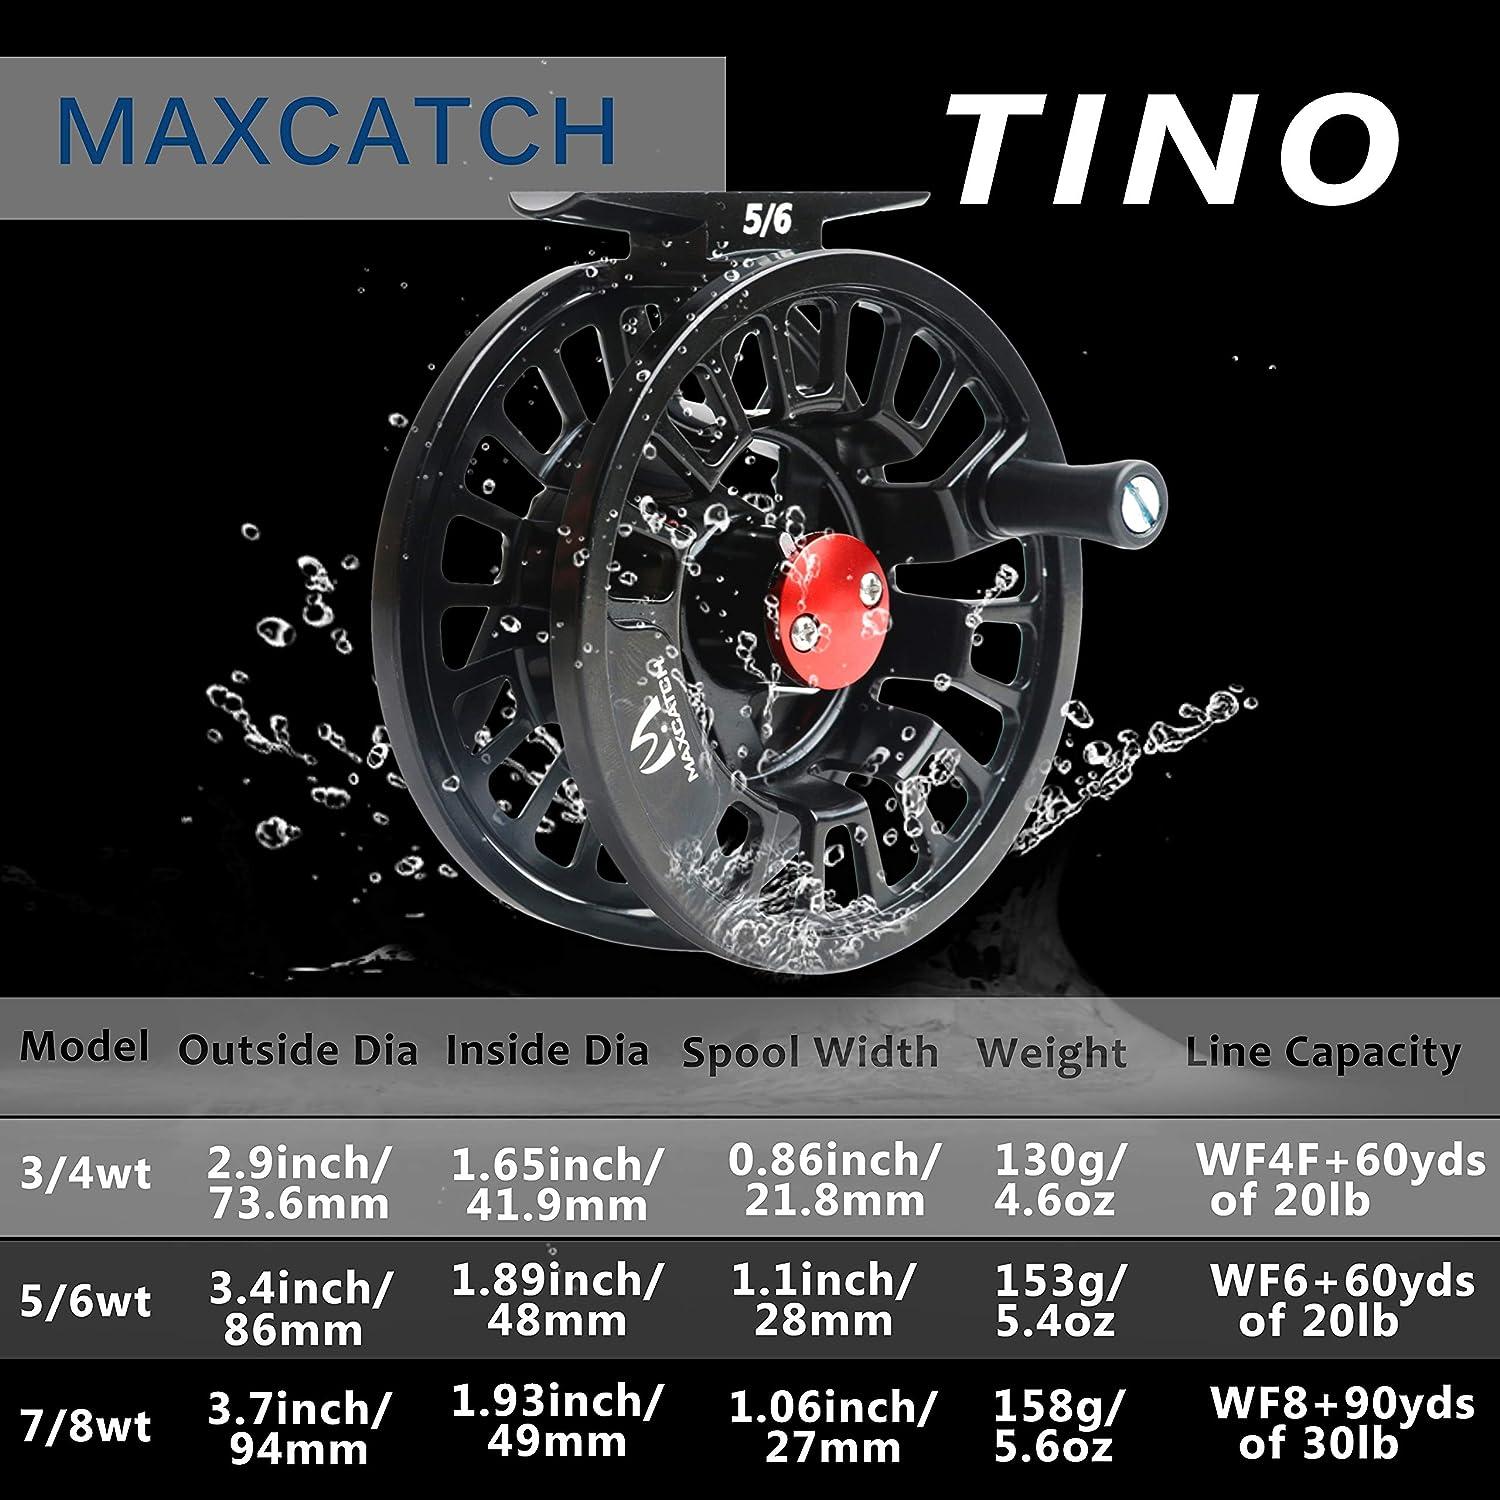  Maxcatch Tino Fly Fishing Reel (3/4wt 5/6wt 7/8wt) And Pre-Loaded  Fly Reel